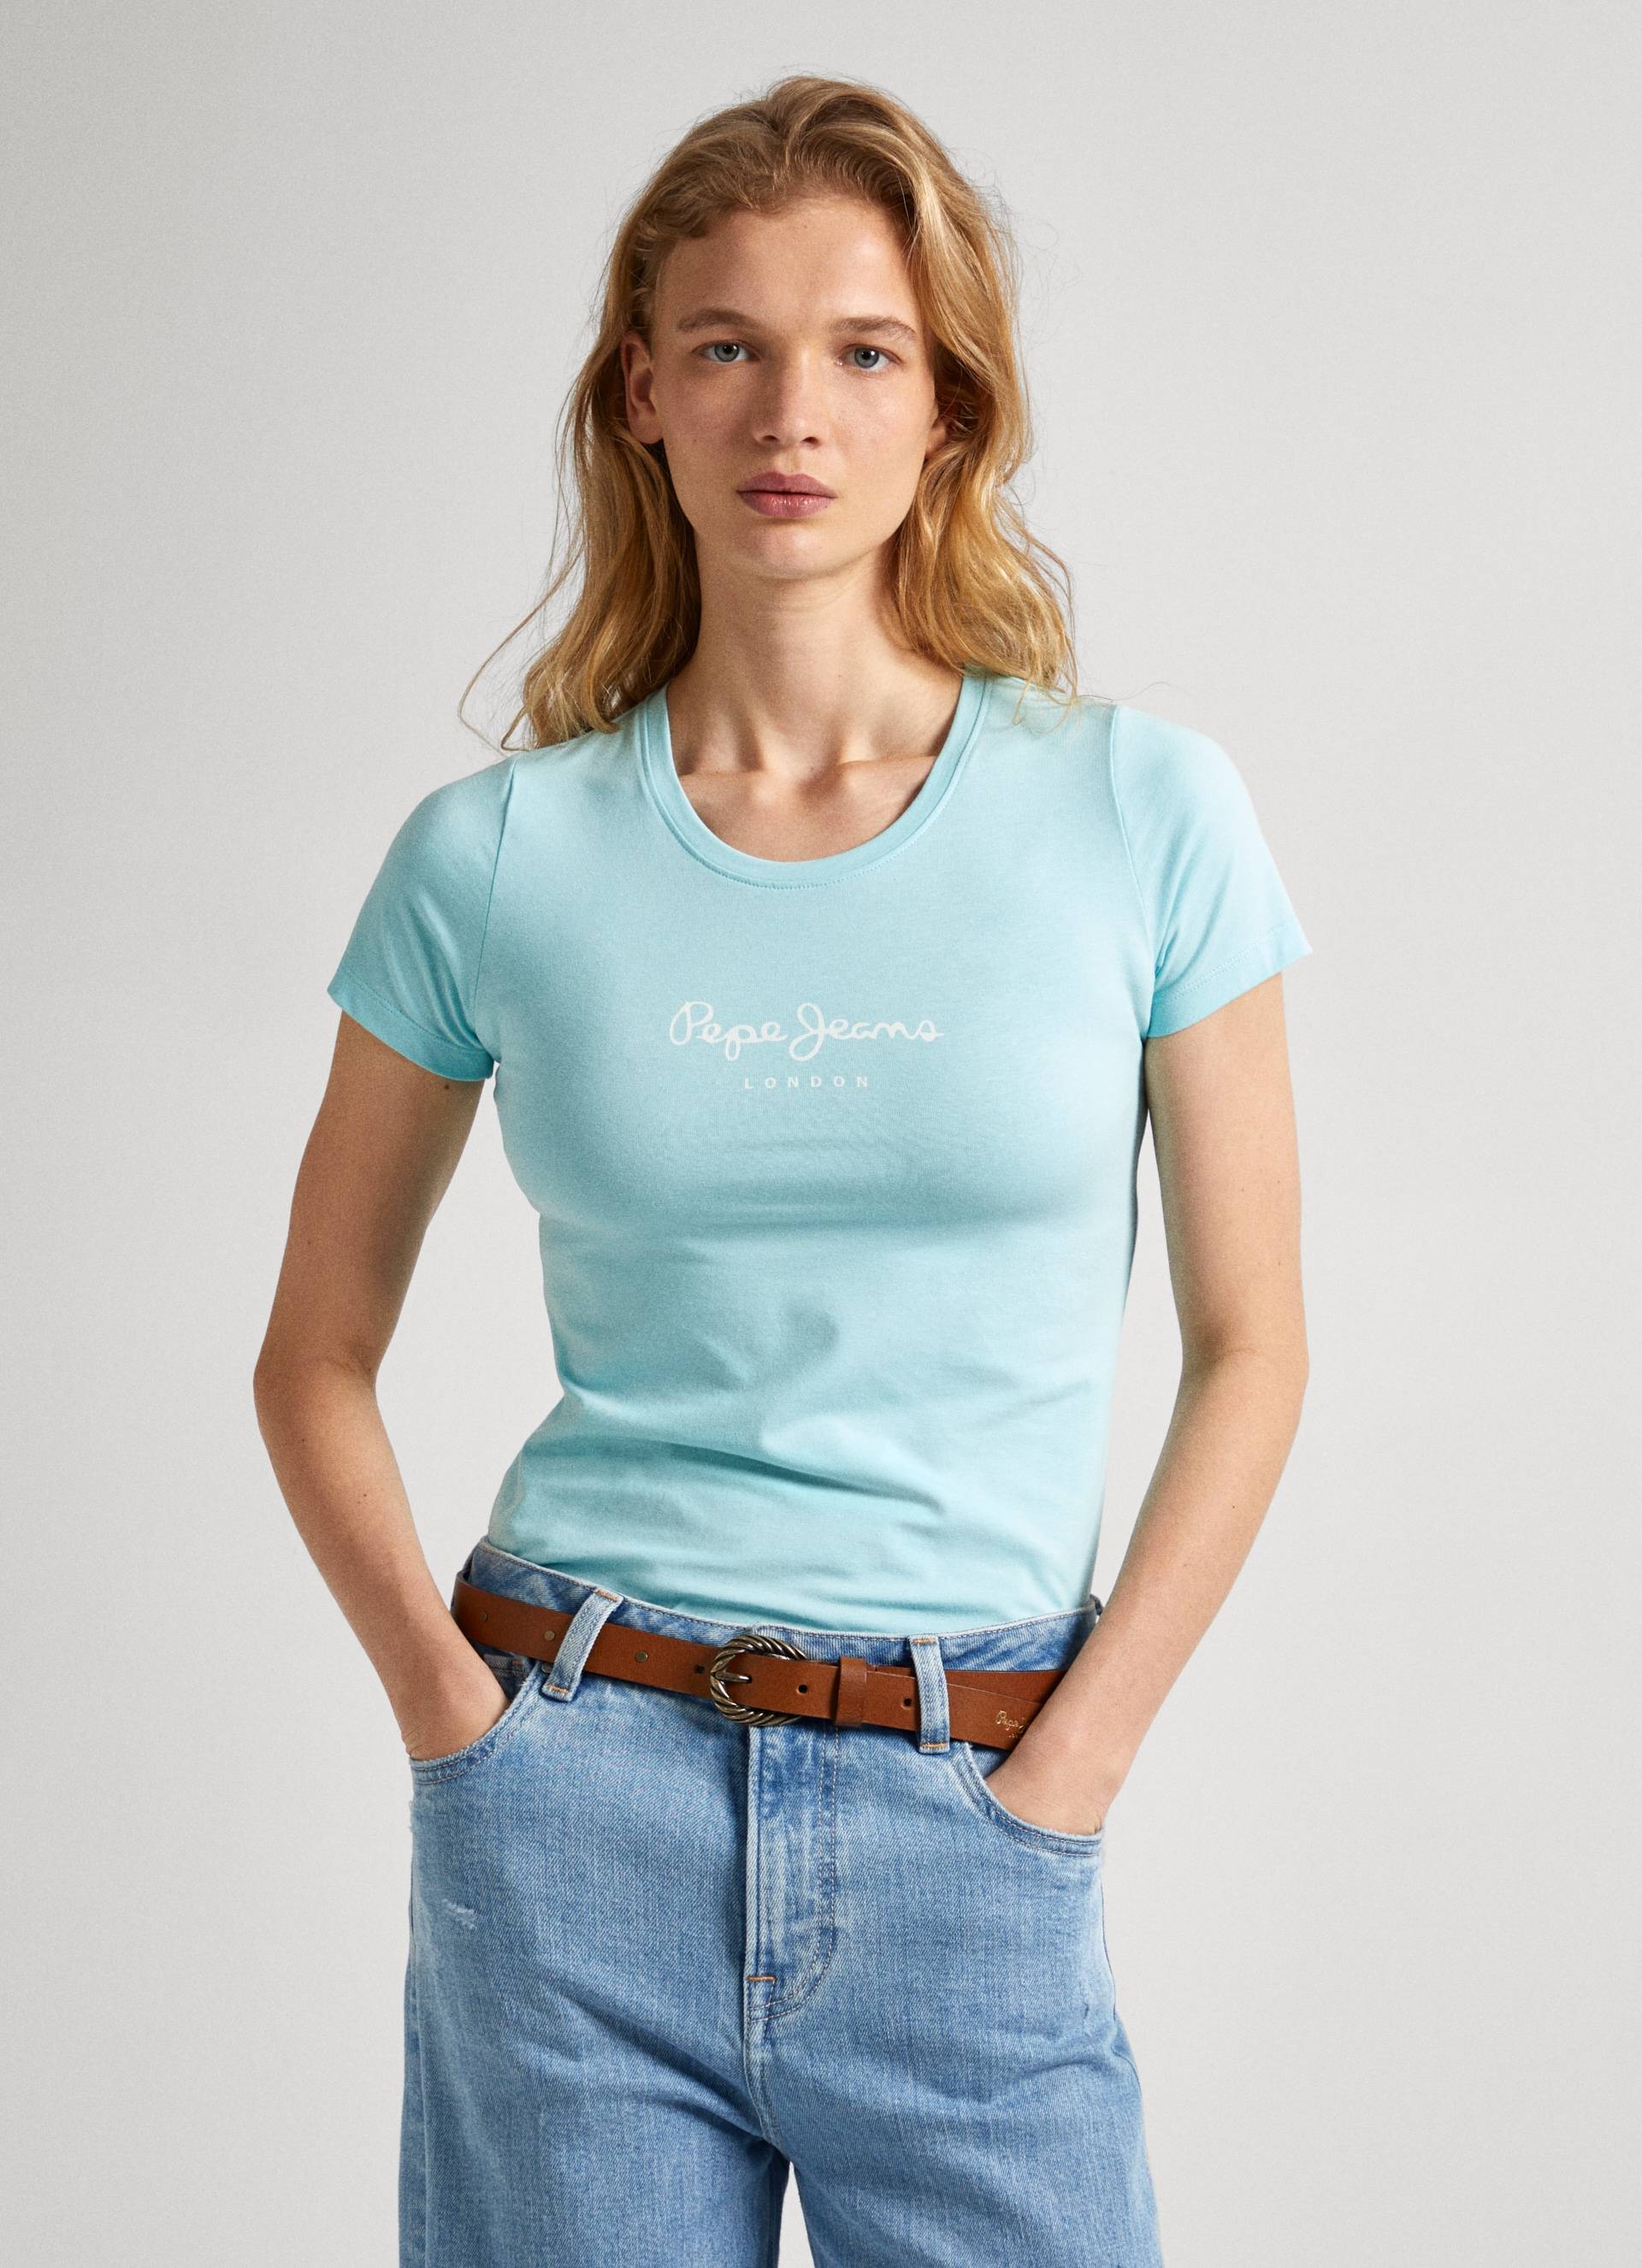 Pepe Jeans T-Shirt »Shirt NEW VIRGINIA« von Pepe Jeans